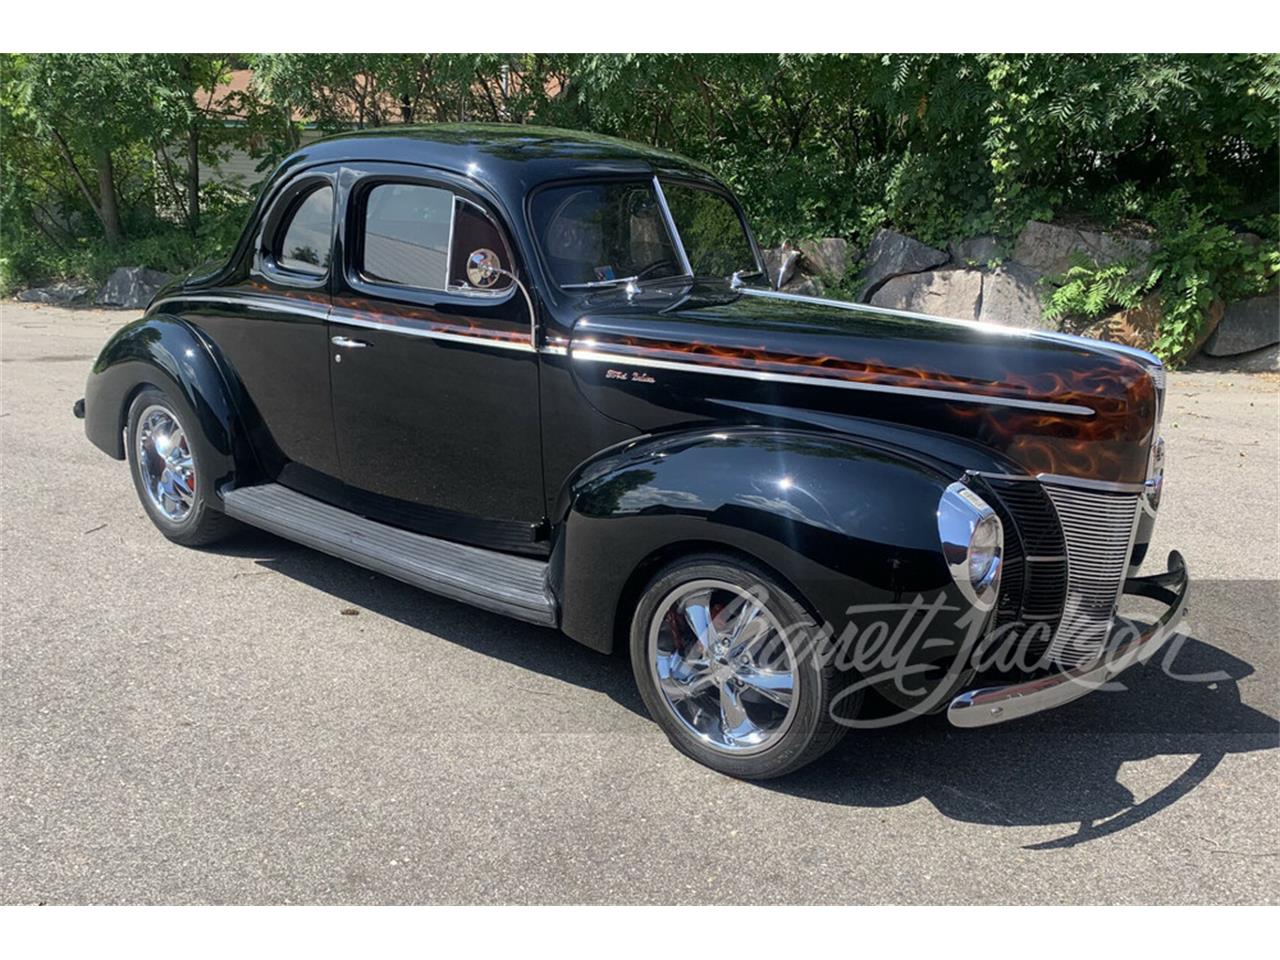 For Sale at Auction: 1940 Ford 5-Window Coupe in Scottsdale, Arizona for sale in Scottsdale, AZ